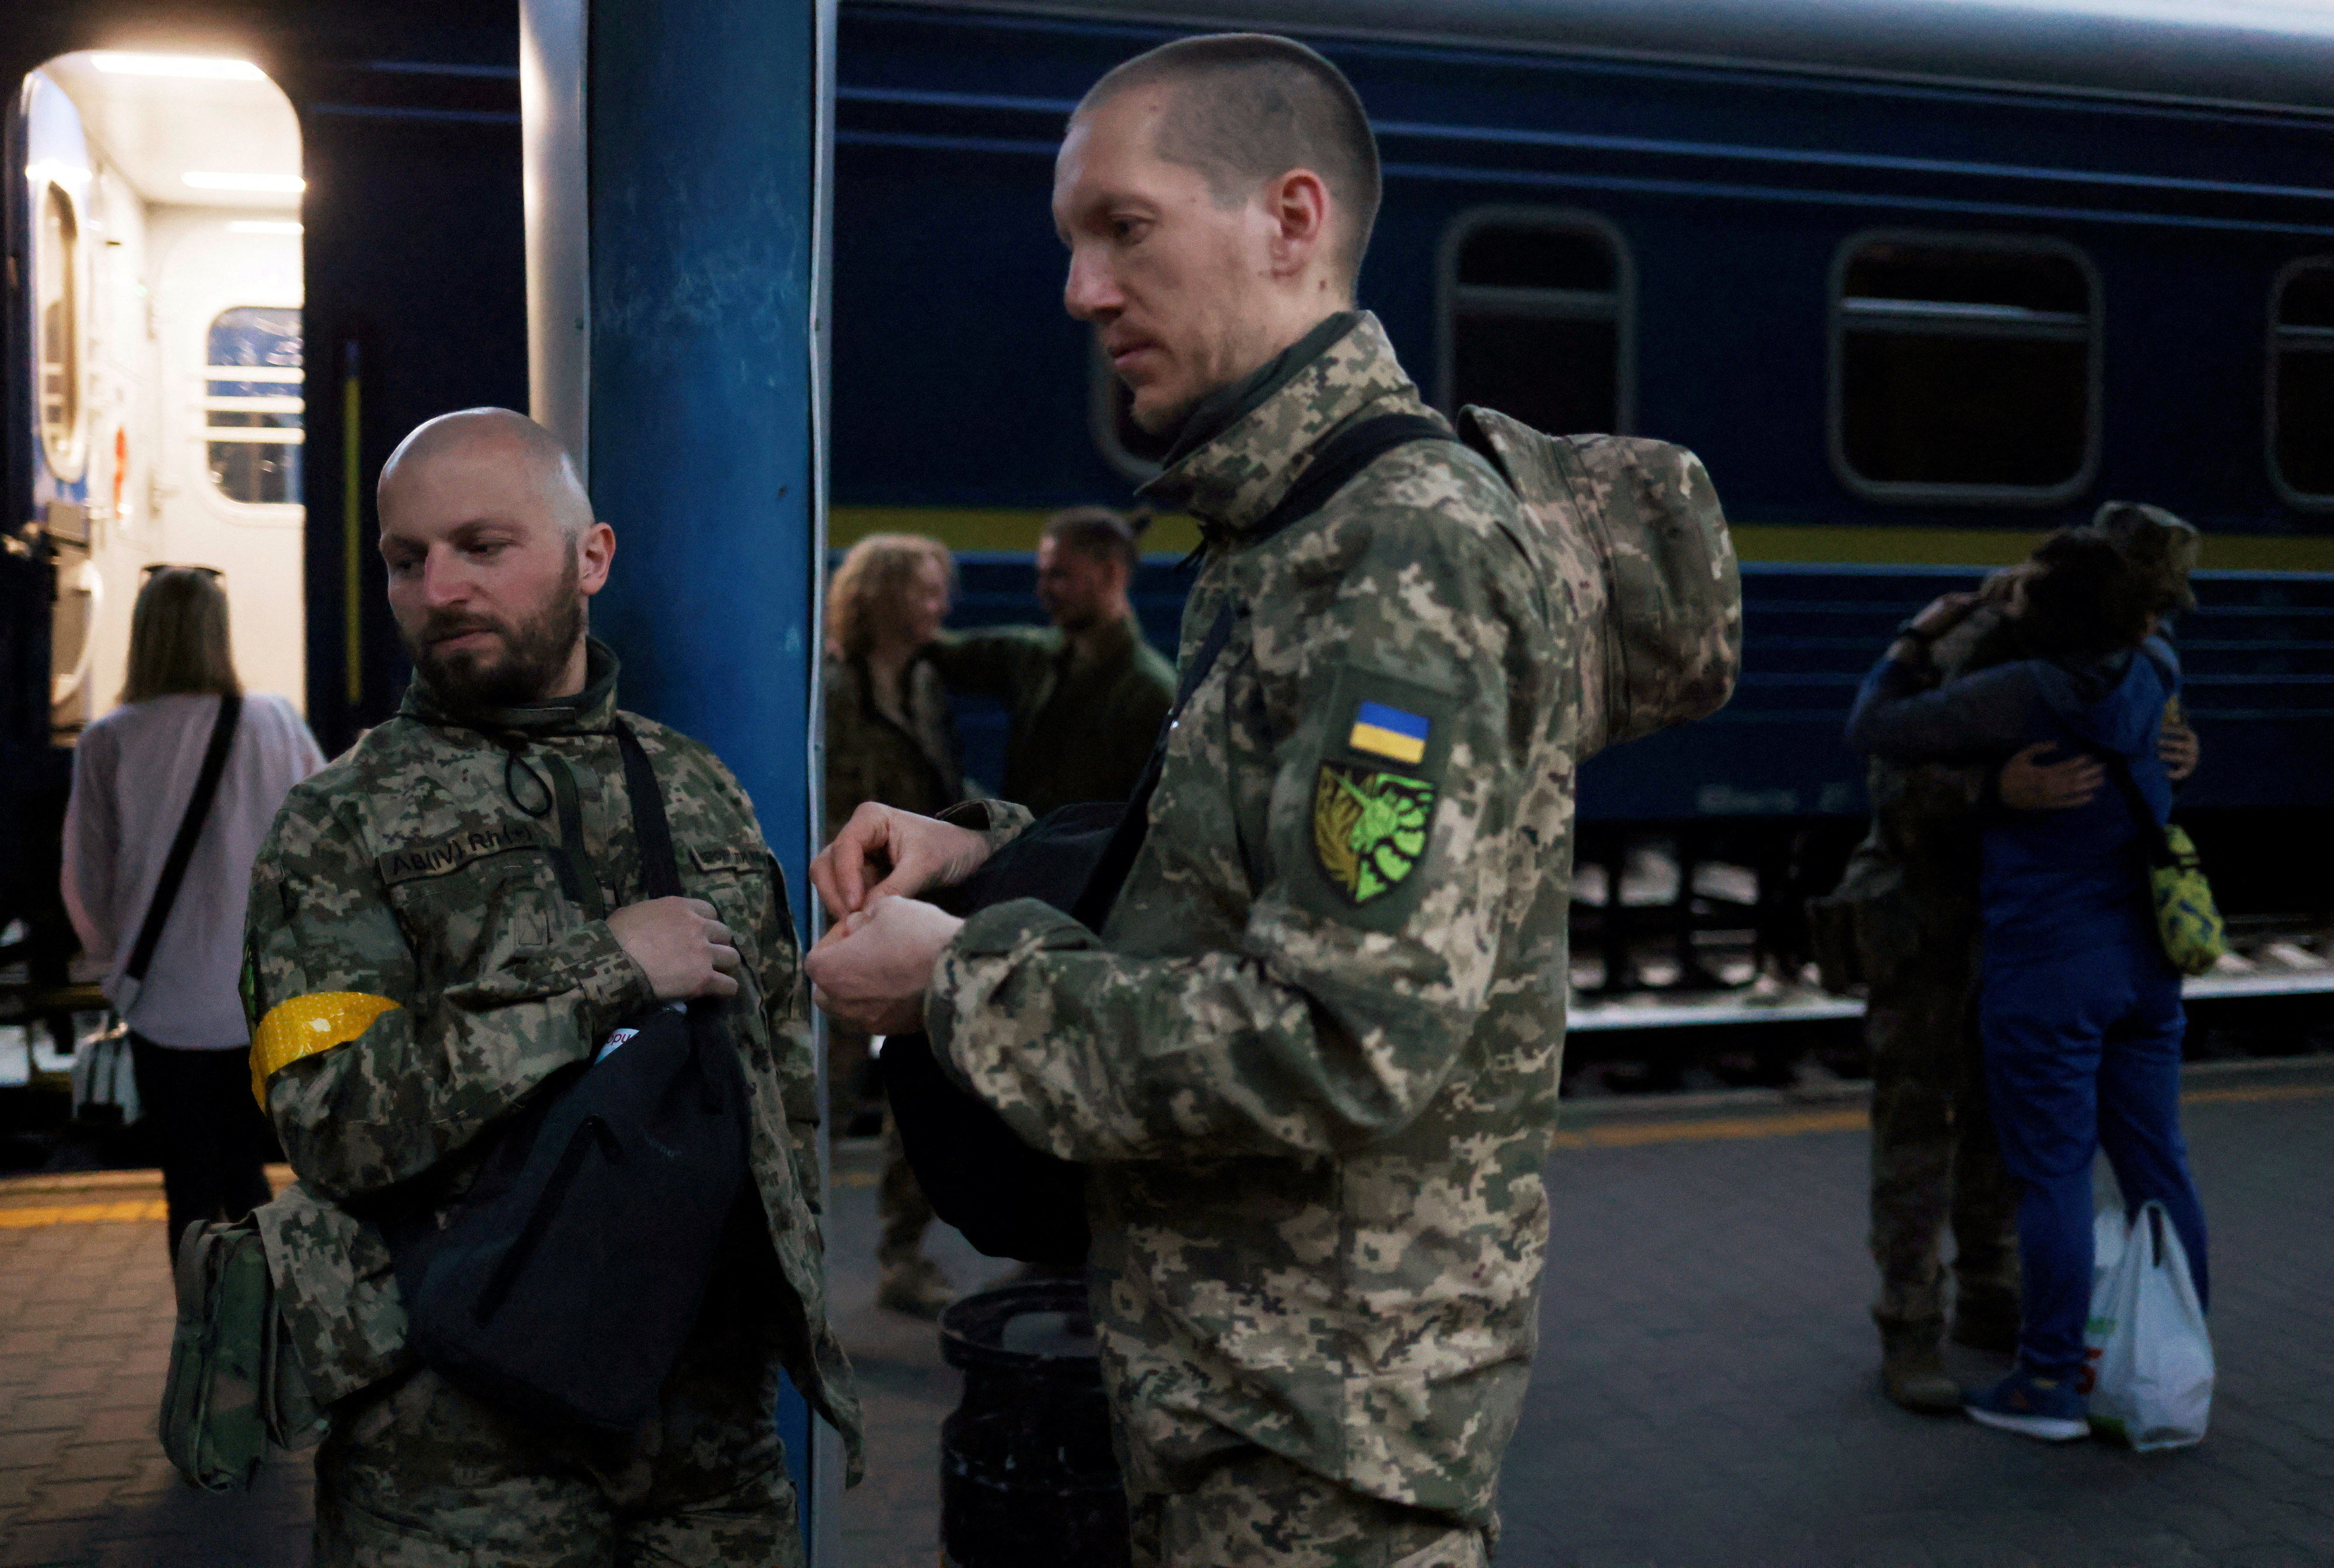 Couple leave for the frontline to serve the Territorial Defence army, in Kyiv